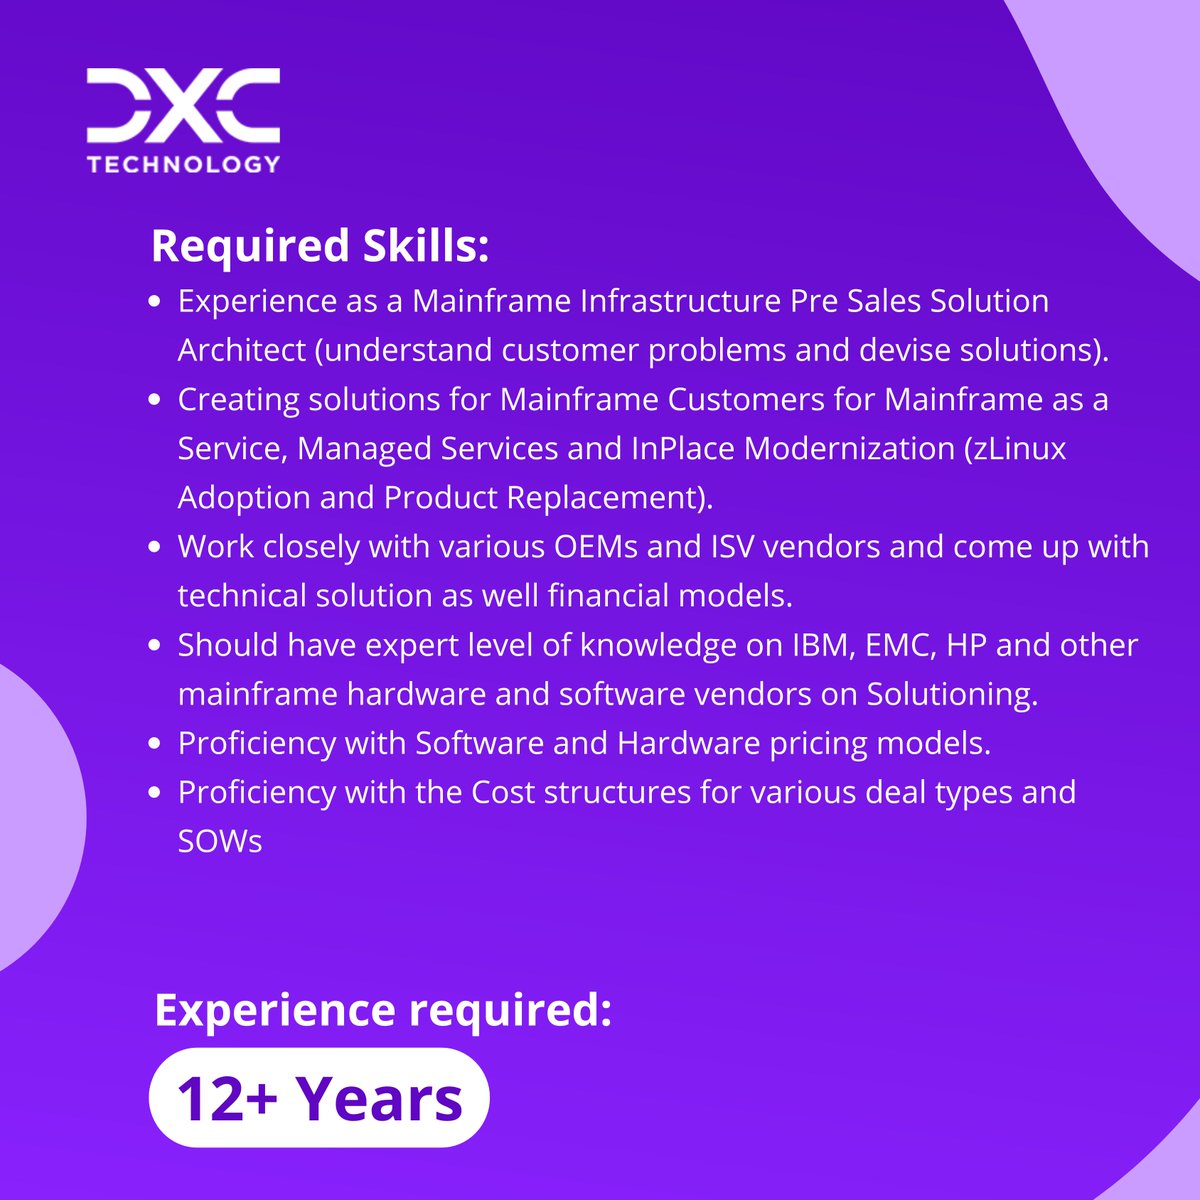 DXC Technology India is looking to hire for the Mainframe Transformation team. If you are interested in being a part of our team, please send your resume at alok.kumar3@dxc.com & himanshu.soni@dxc.com and we'll get in touch with you.